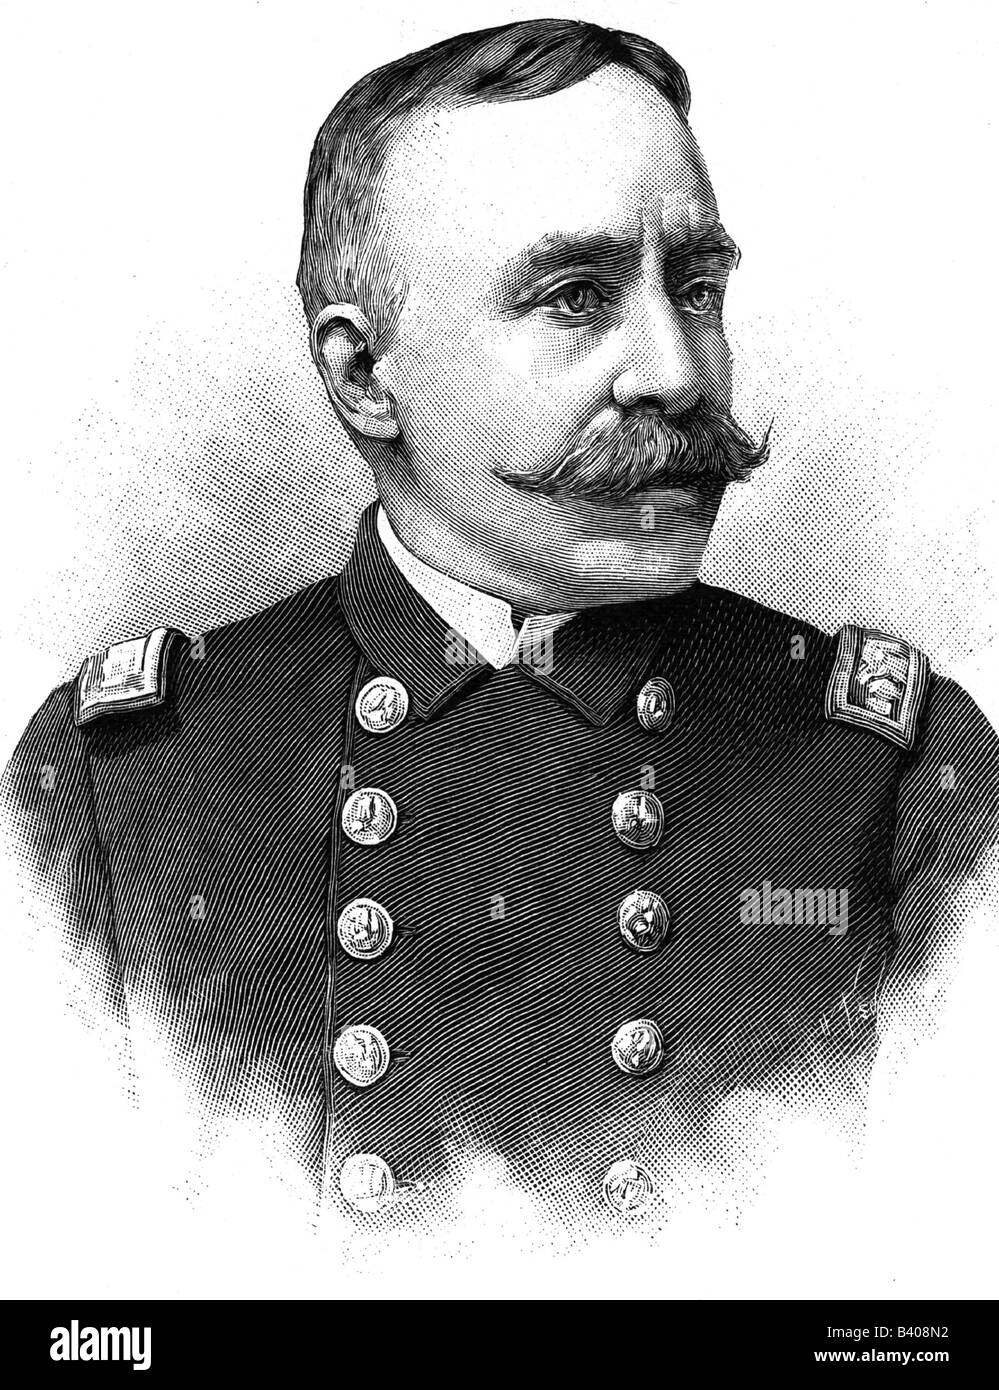 Dewey, George, 26.12.1837 - 16.1.1917, admiral of the United States of America, commander of the US Pacific Fleet 1898, later commander in chief of the US Navy, portrait, wood engraving, 1898, Stock Photo